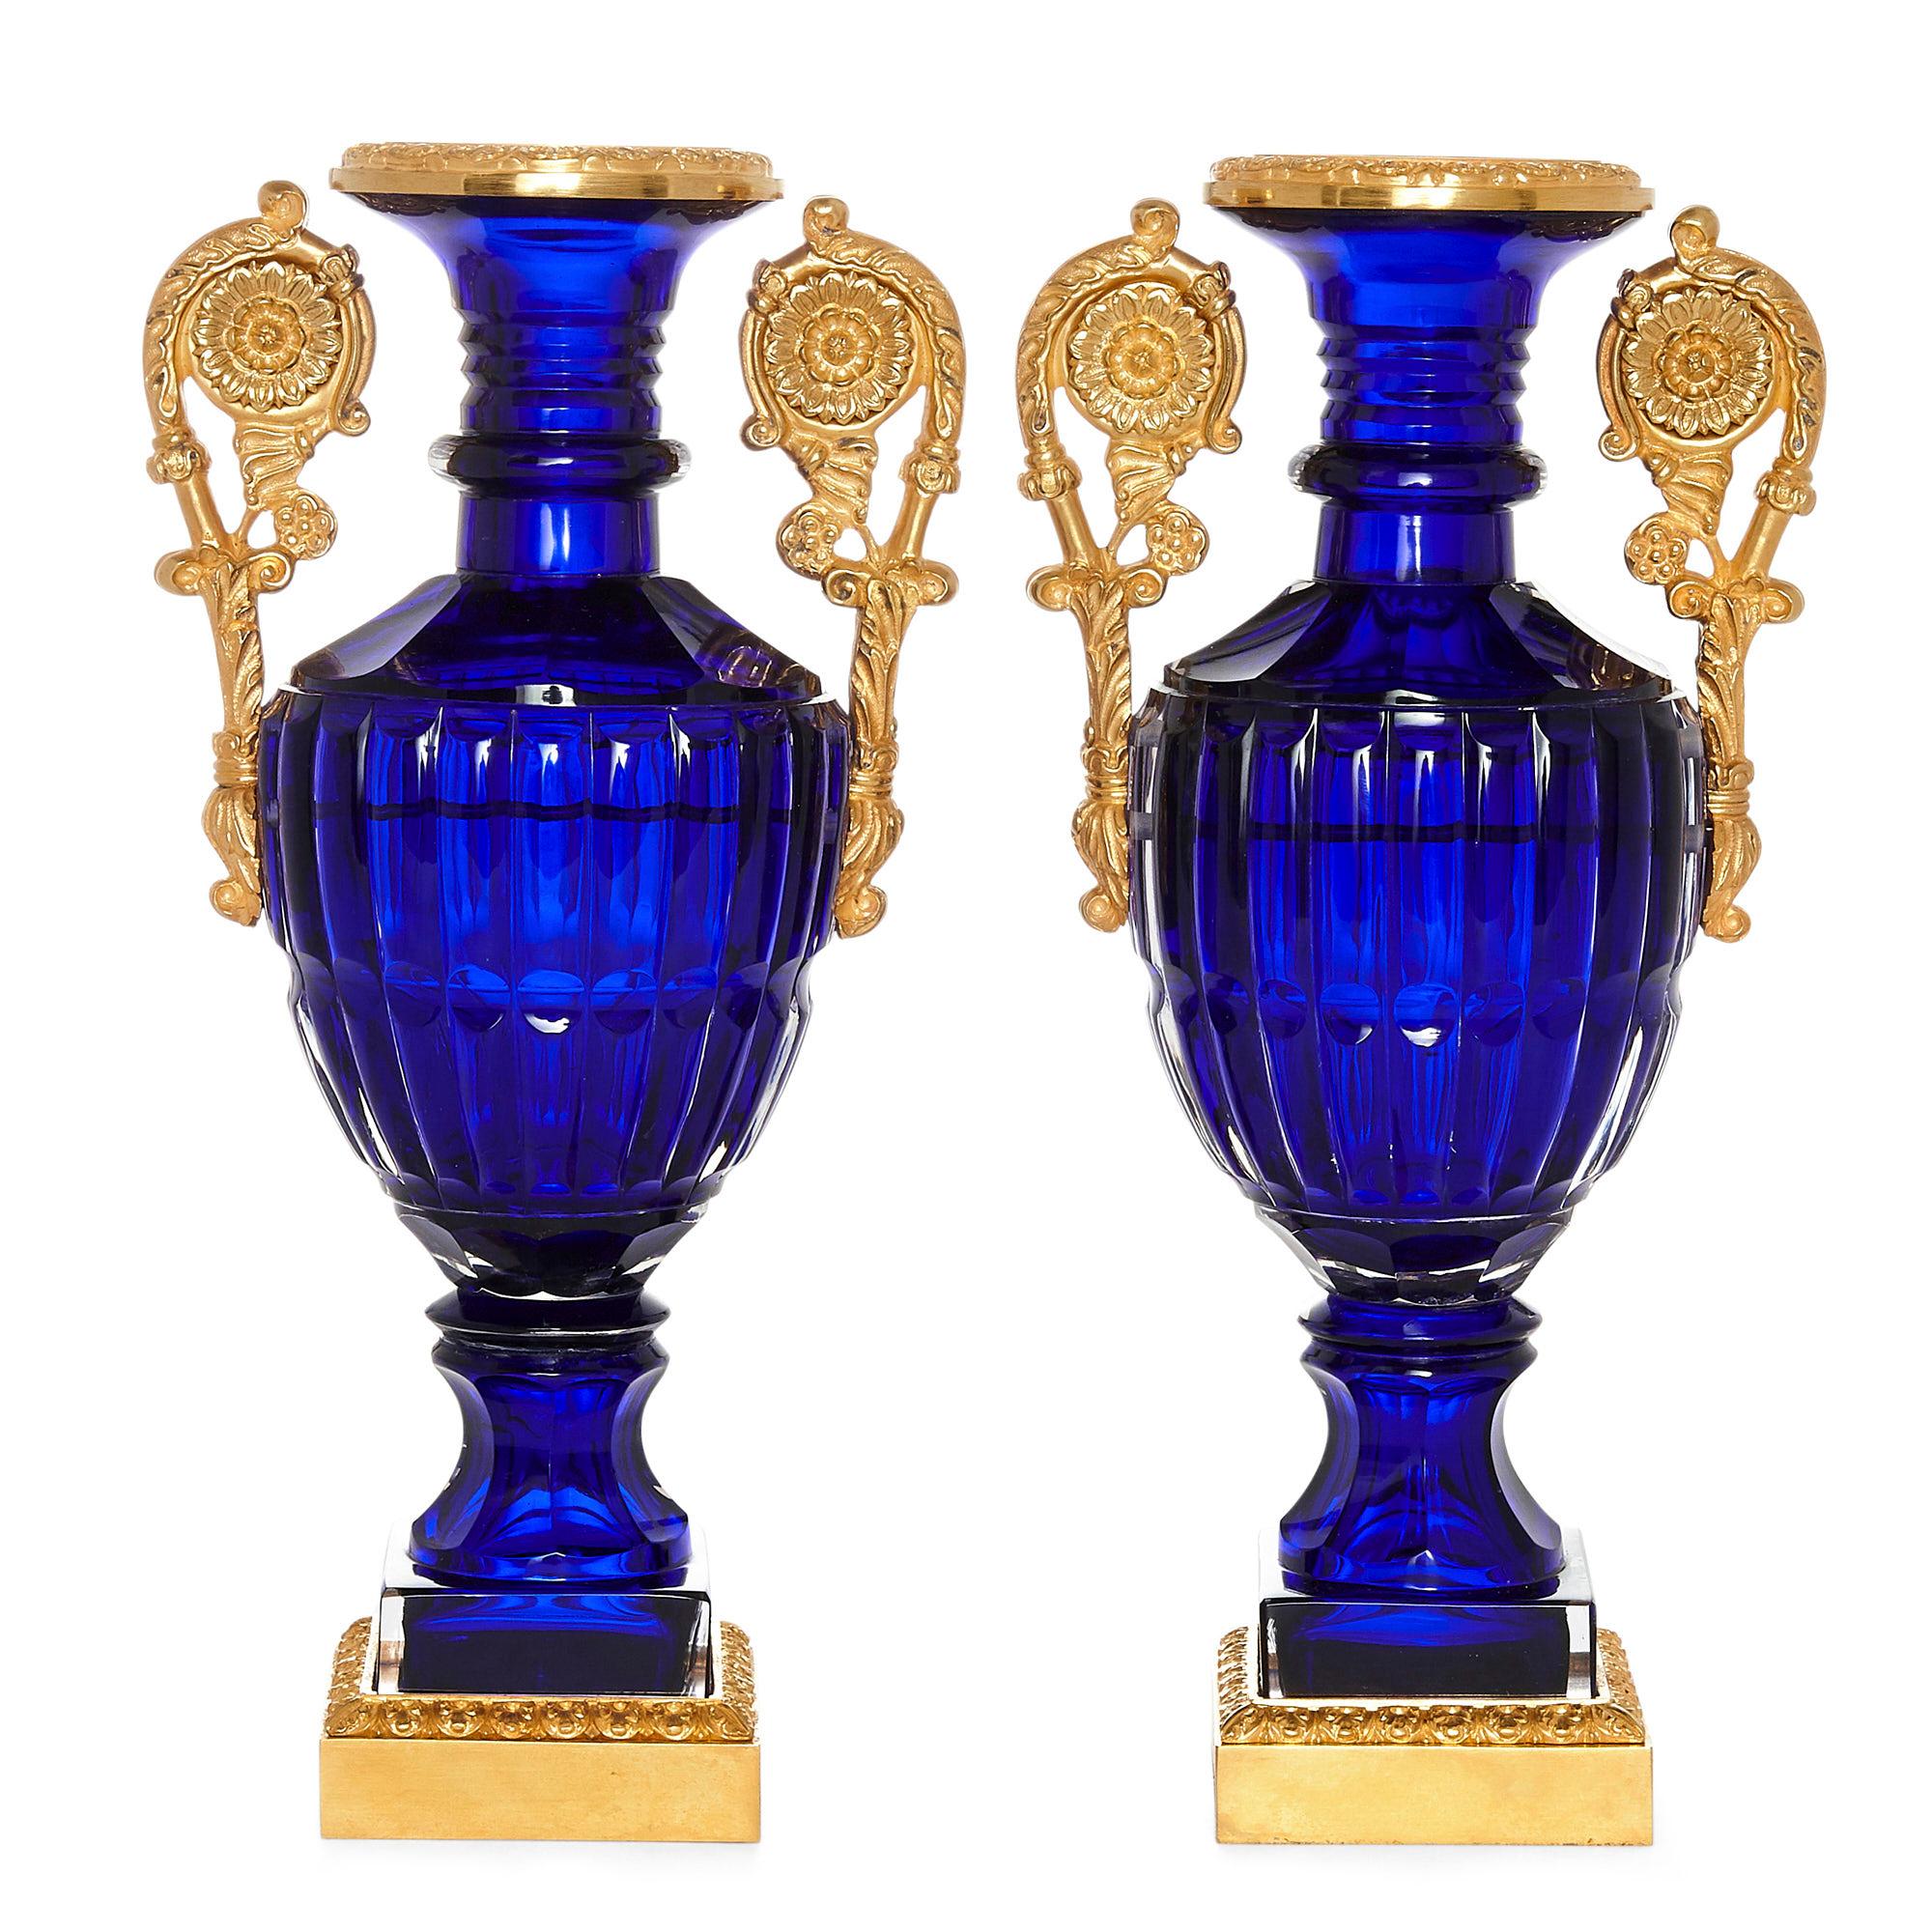 Two neoclassical style Russian cut glass and Ormolu vases
Russian, 20th century
Dimensions: Height 32cm, width 16cm, depth 12cm

Each vase in this pair of Russian neoclassical vases has an ovoid sapphire coloured cut glass body and a flared